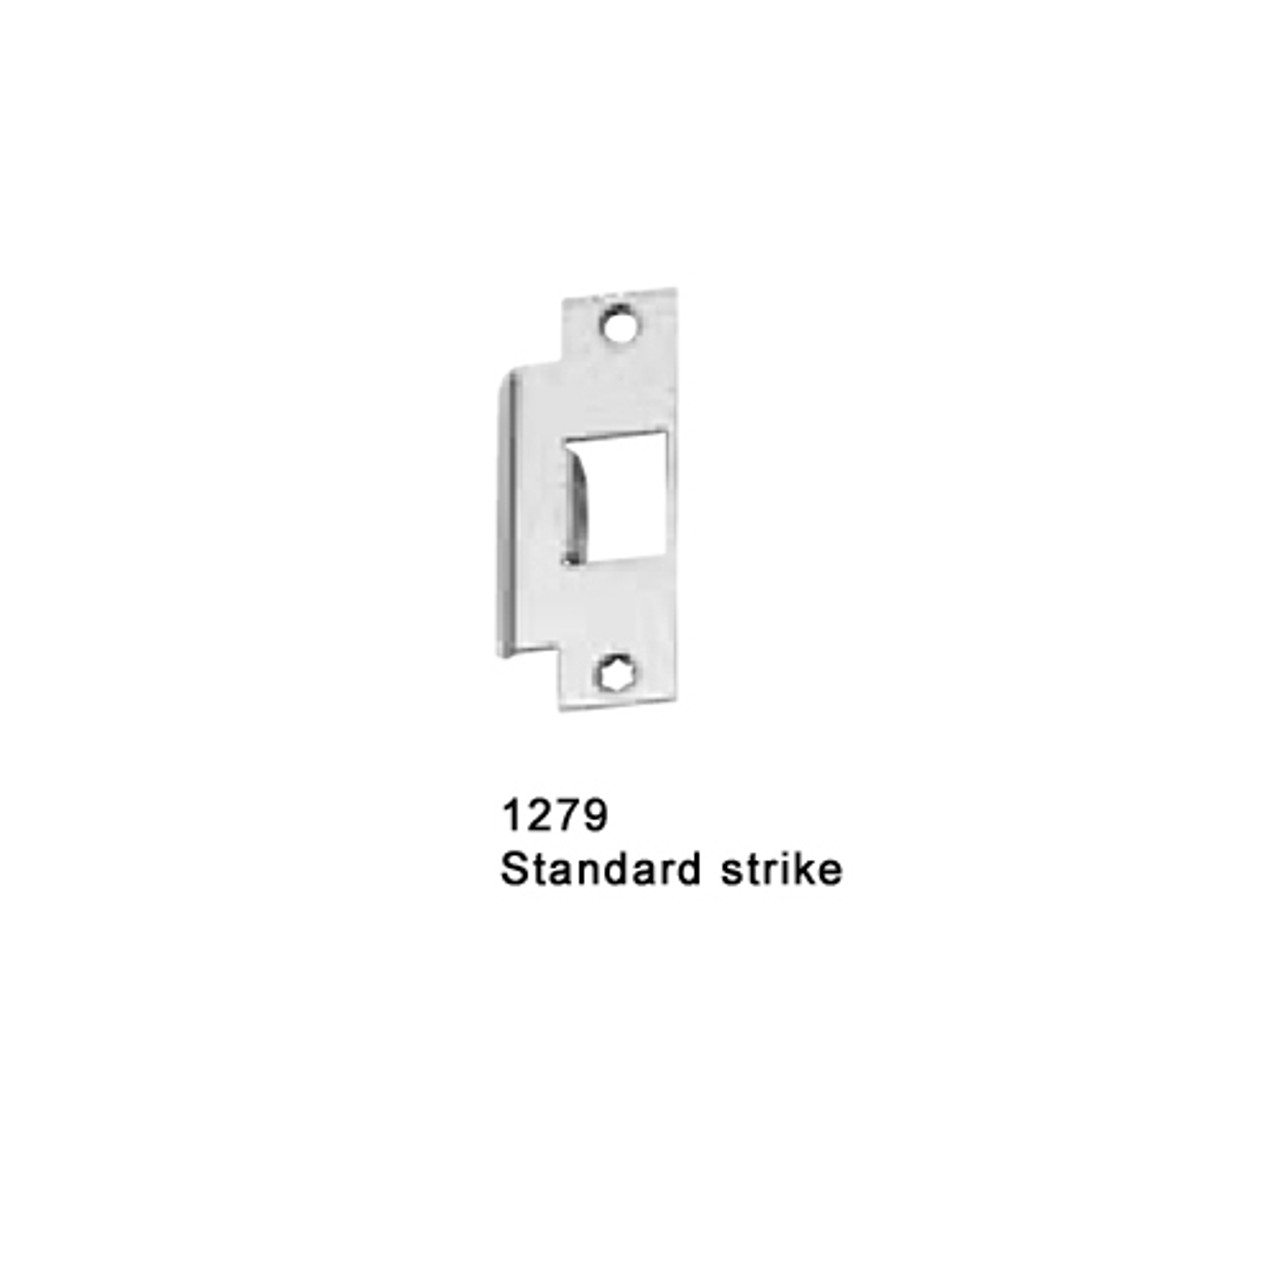 F-25-M-L-BE-Dane-US28-4-LHR Falcon 25 Series Fire Rated Mortise Lock Devices 510L-BE Dane Lever Trim with Blank Escutcheon in Anodized Aluminum